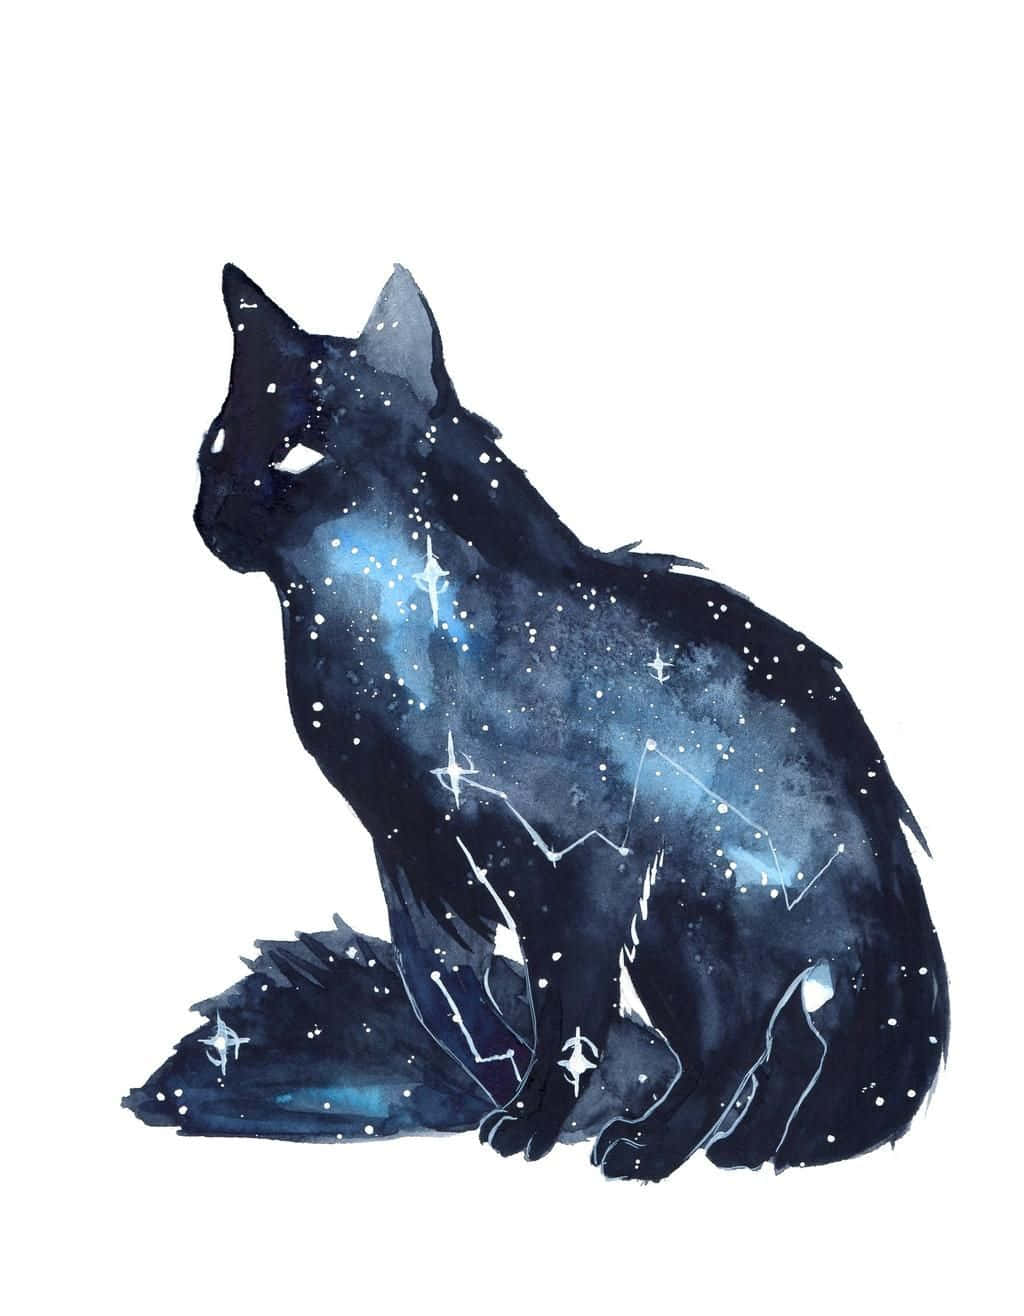 “A Cat That's Out of This World” Wallpaper